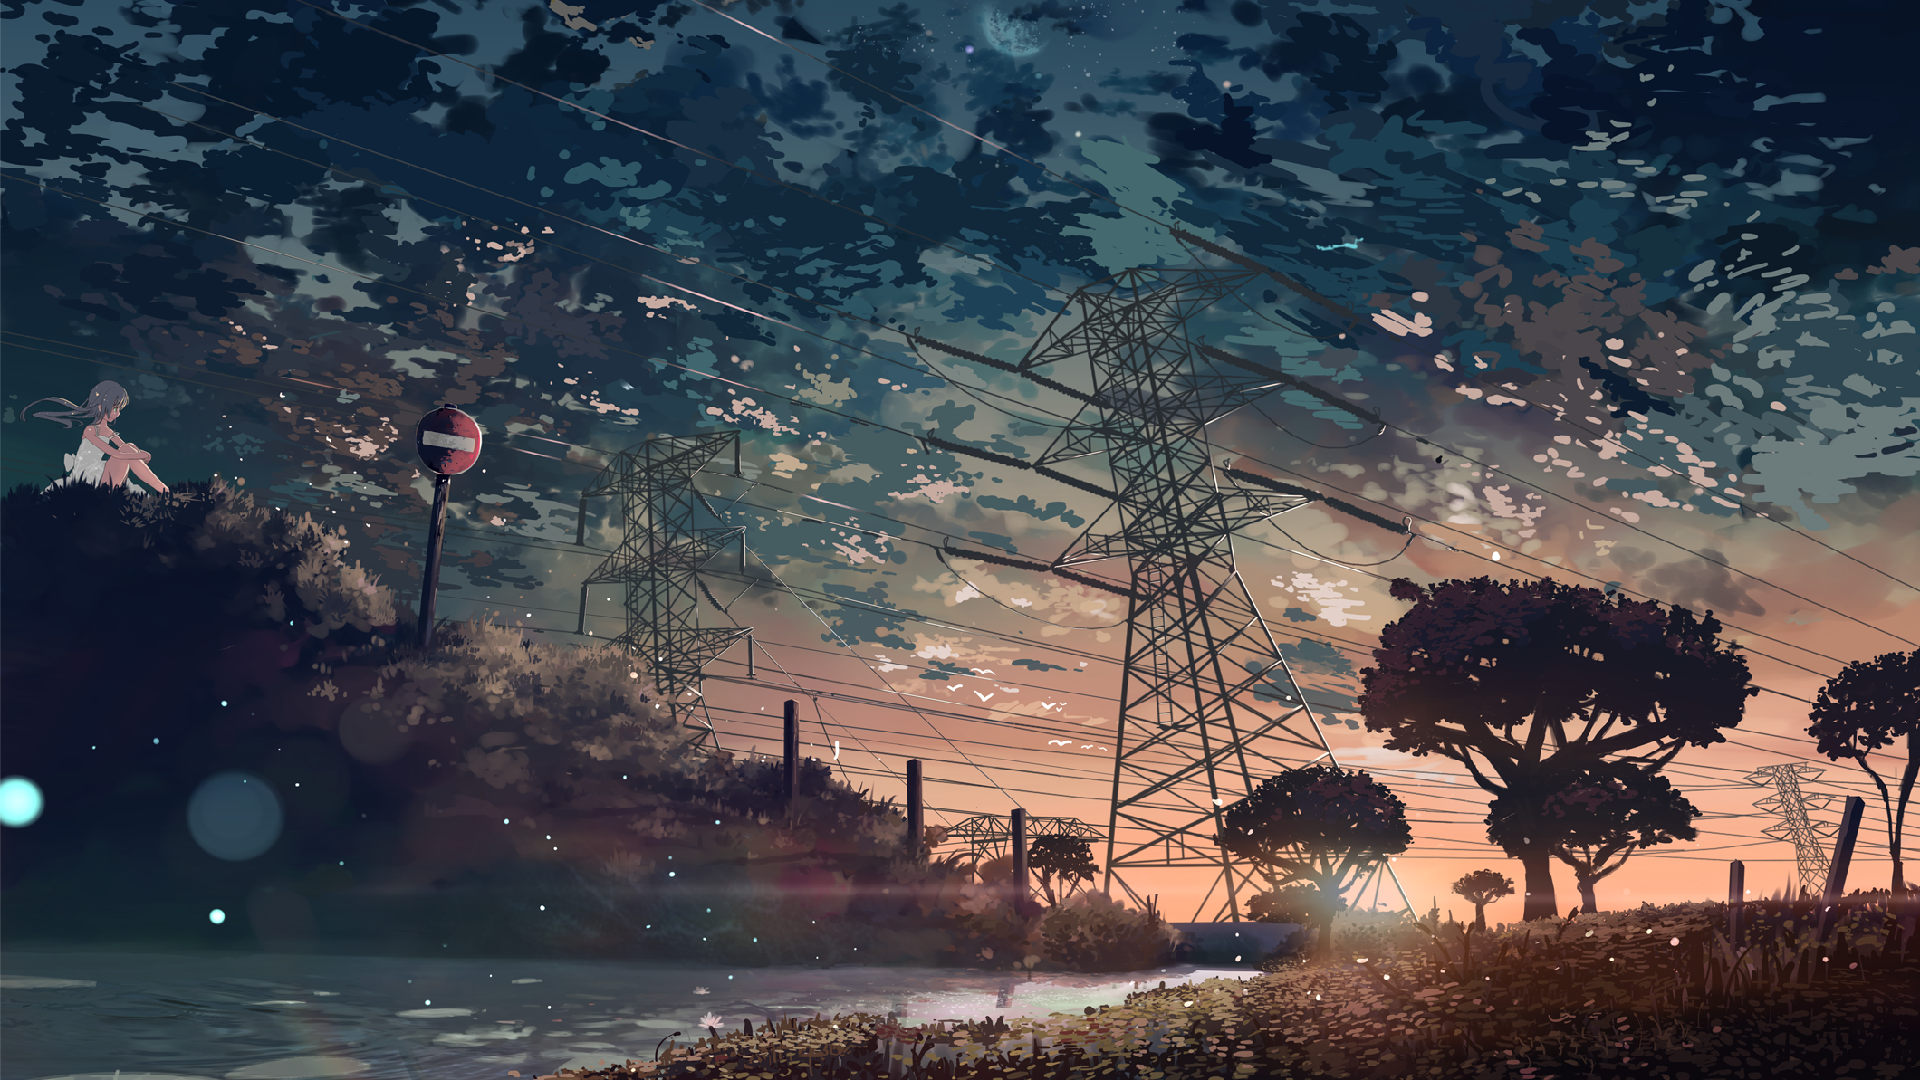 artwork, #sunset, #anime, #trees, #clouds, #utility pole, #power